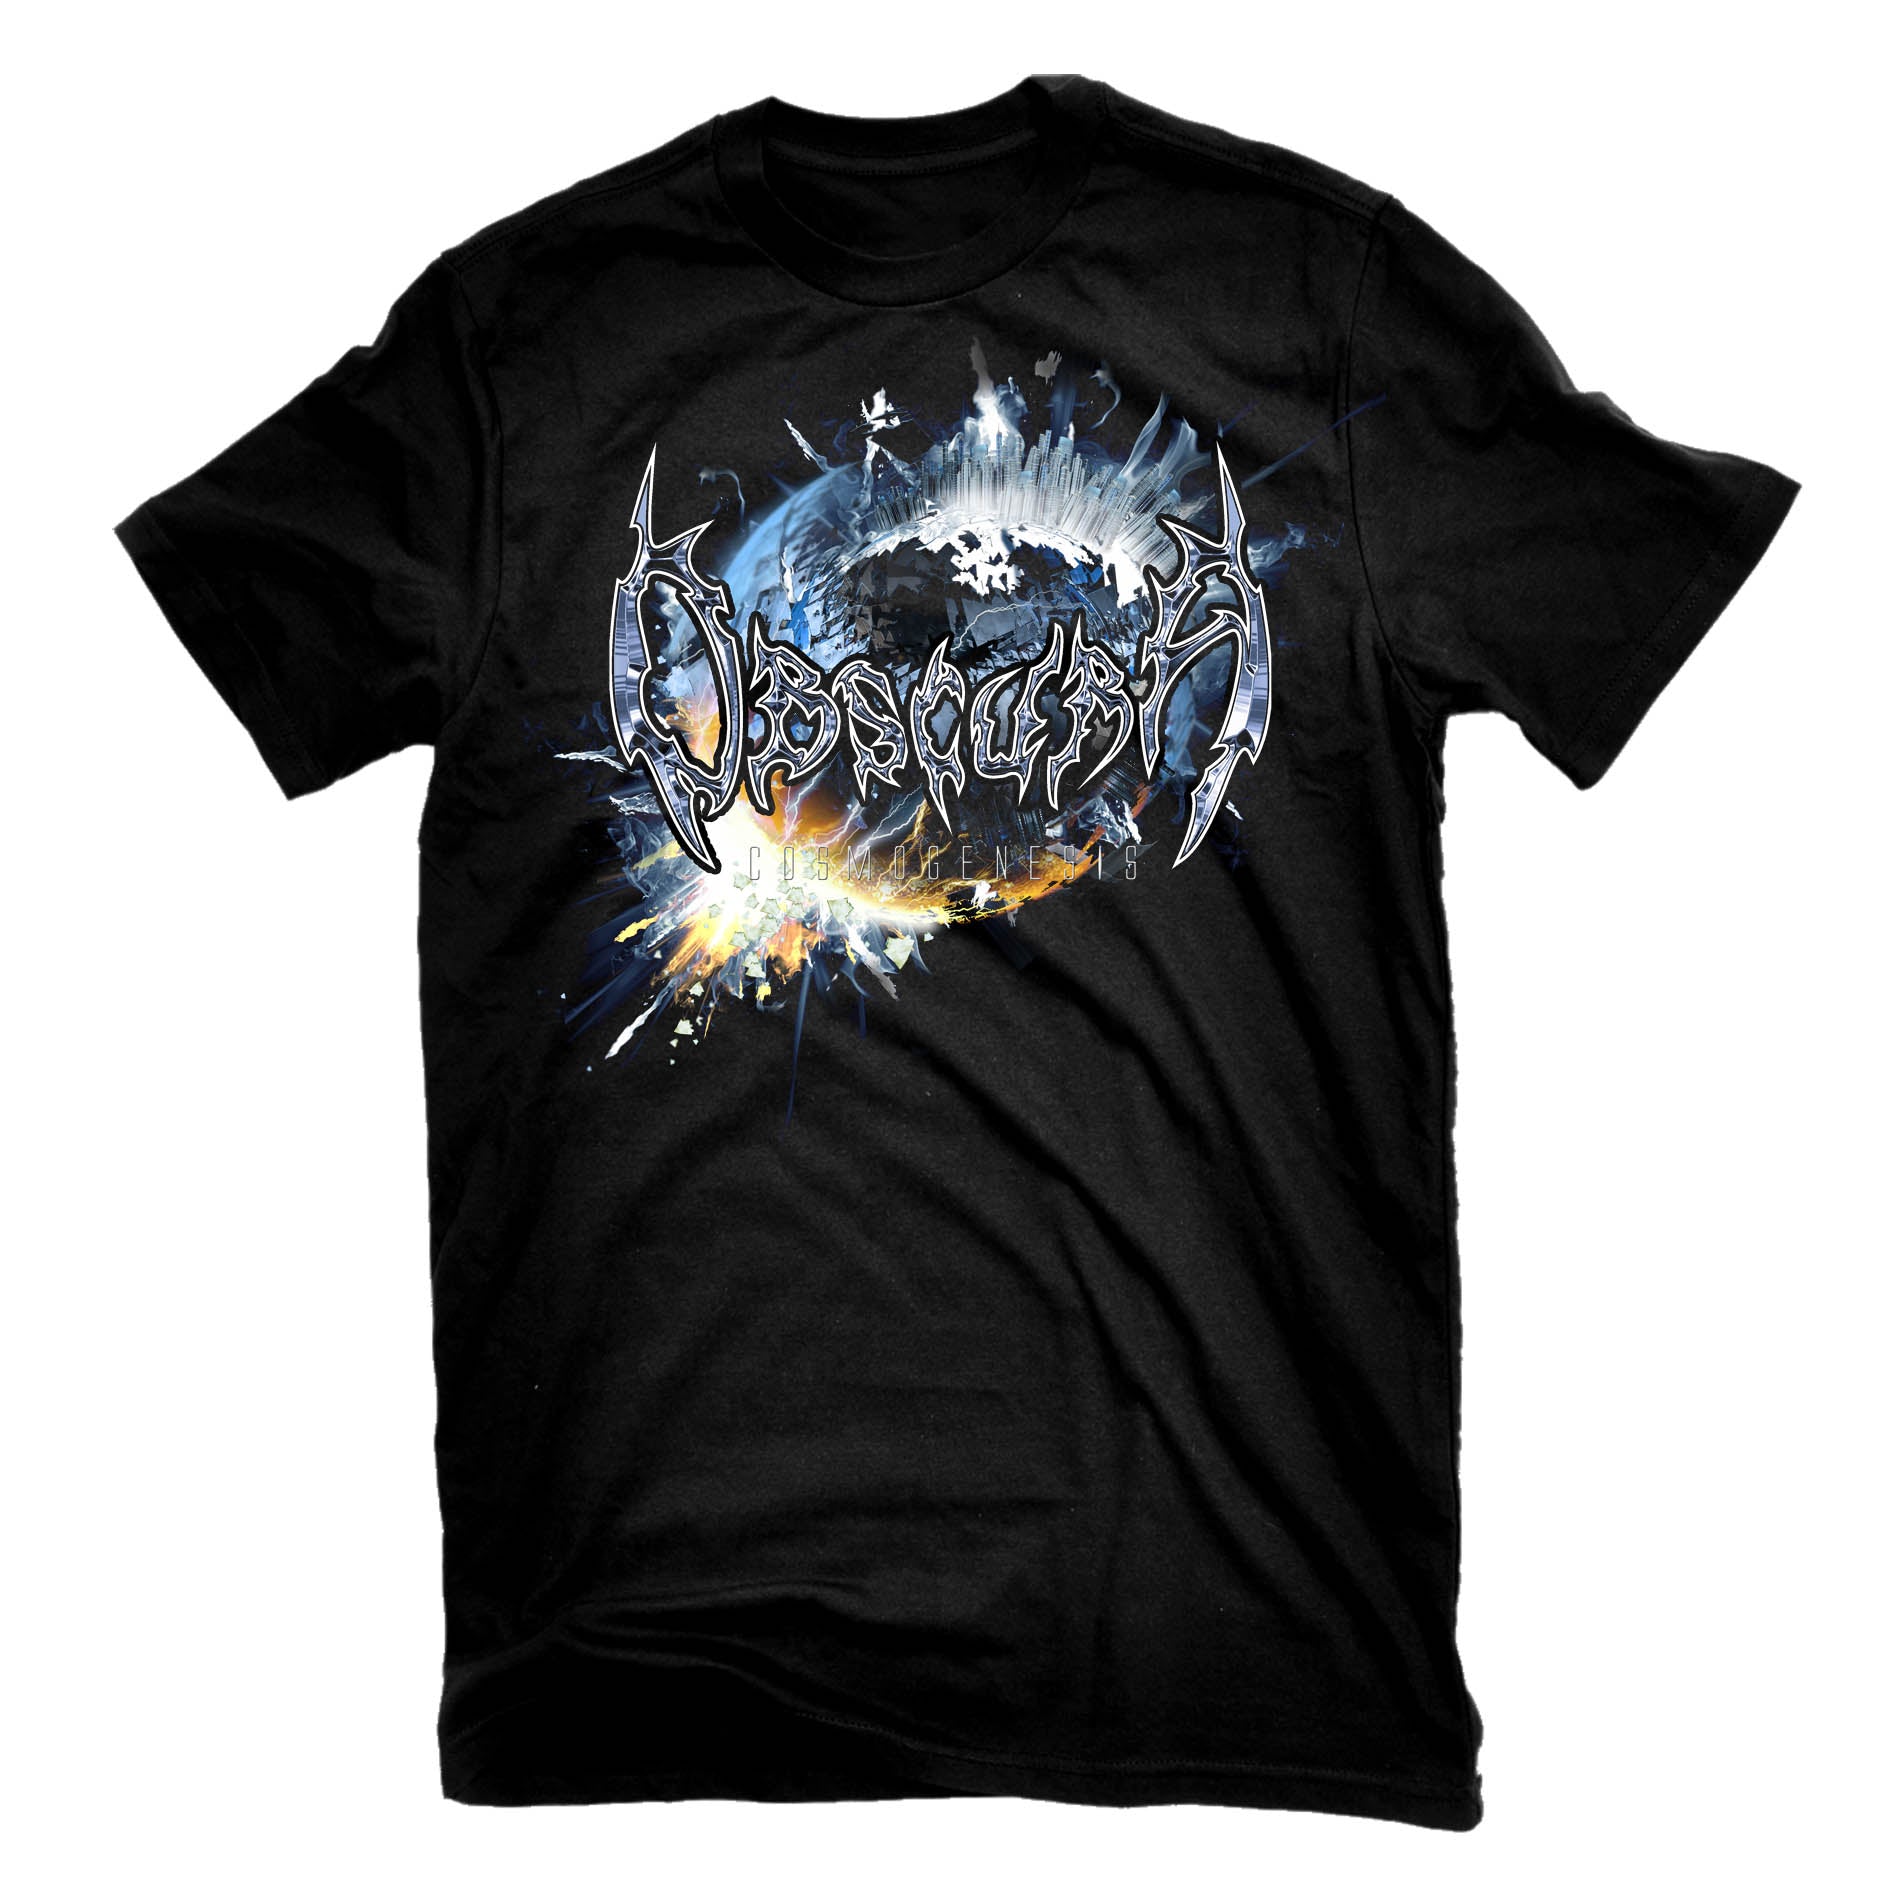 Obscura "Cosmogenesis" T-Shirt